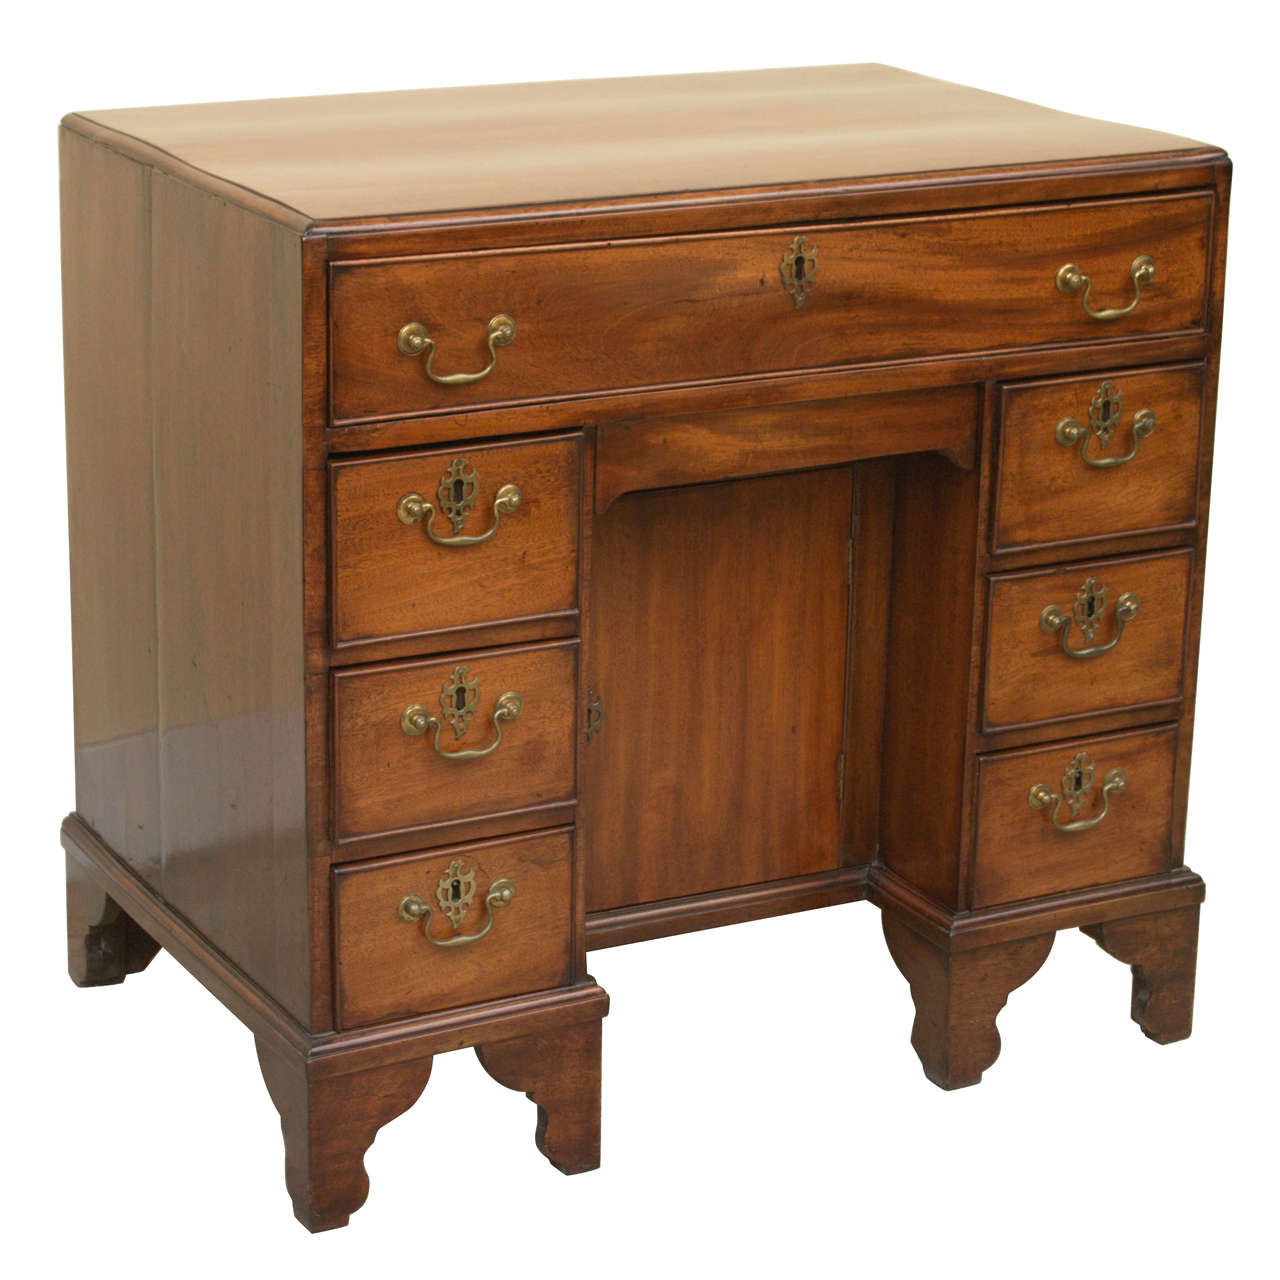 18th Century George II Mahogany Kneehole Desk - STORE CLOSING MAY 31ST For Sale